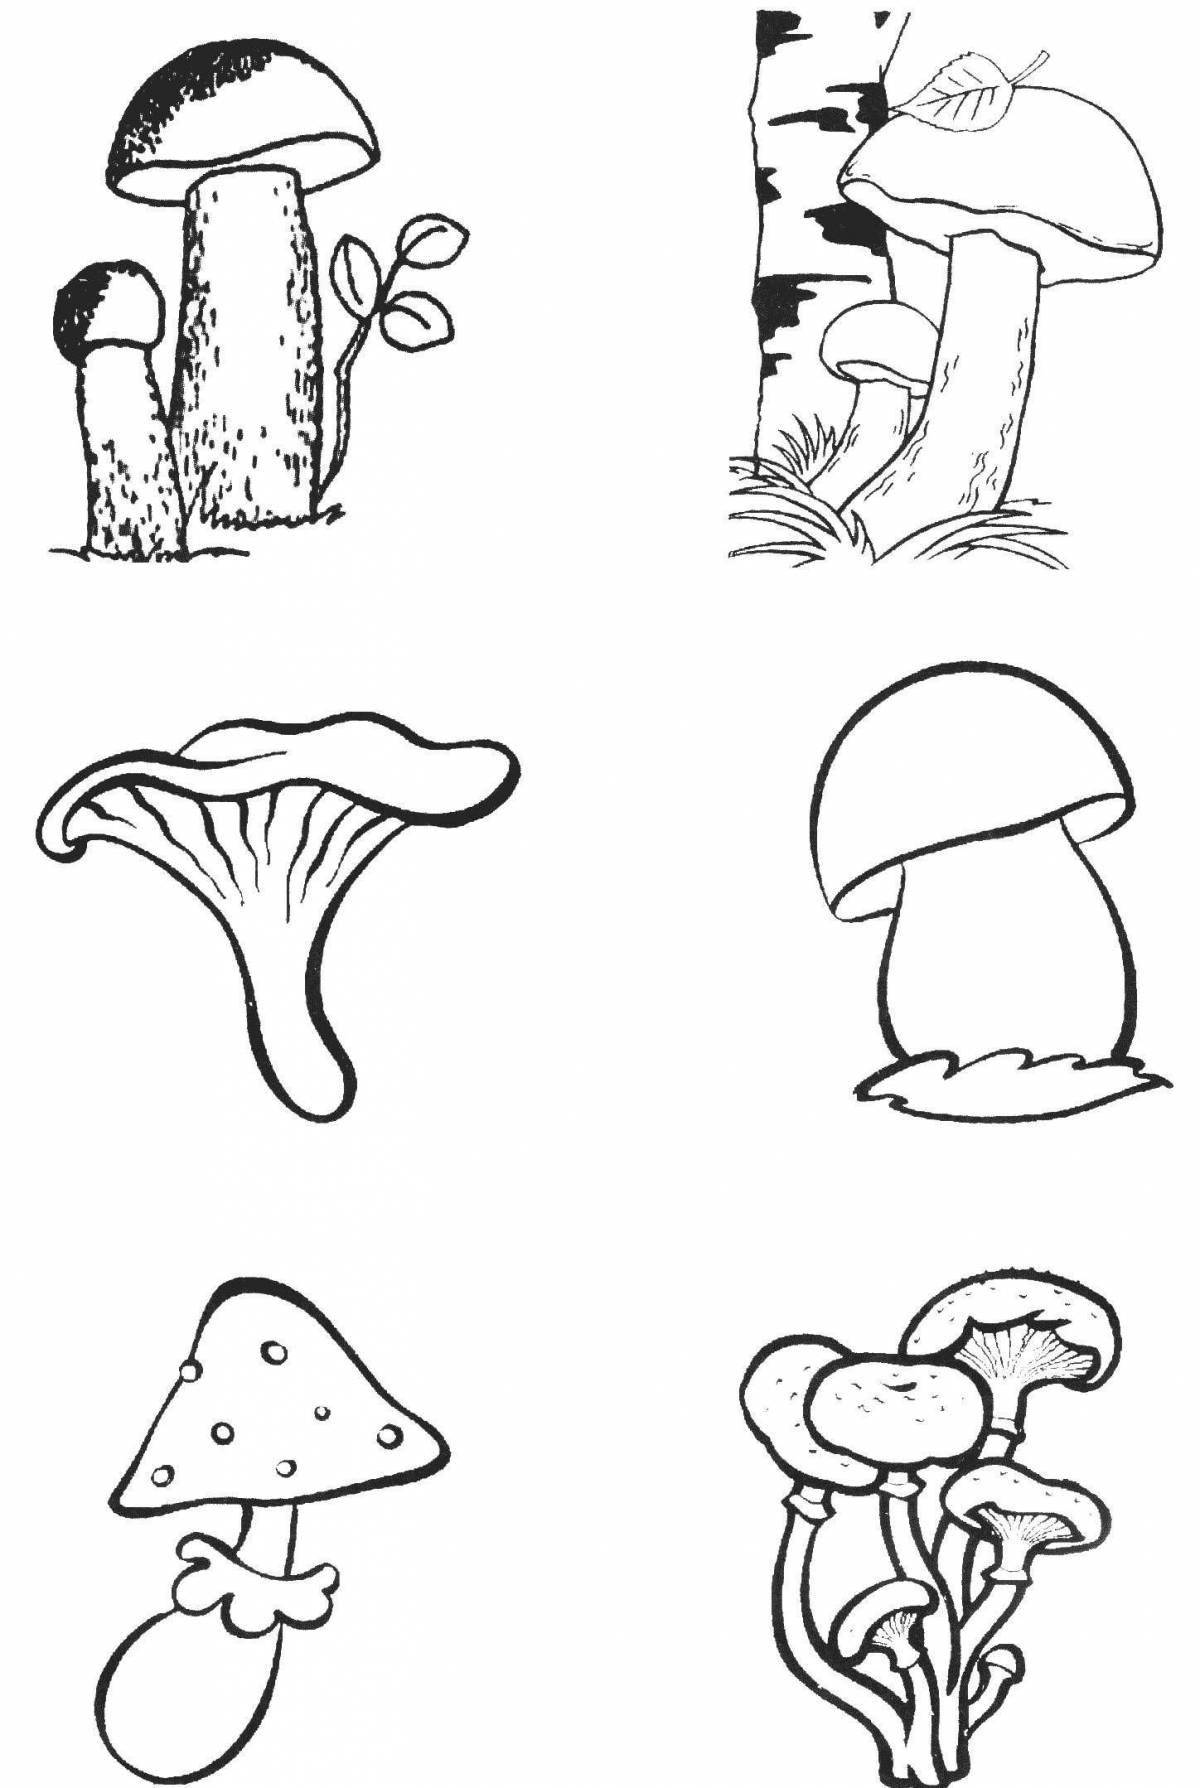 Coloring page amazing inedible mushrooms